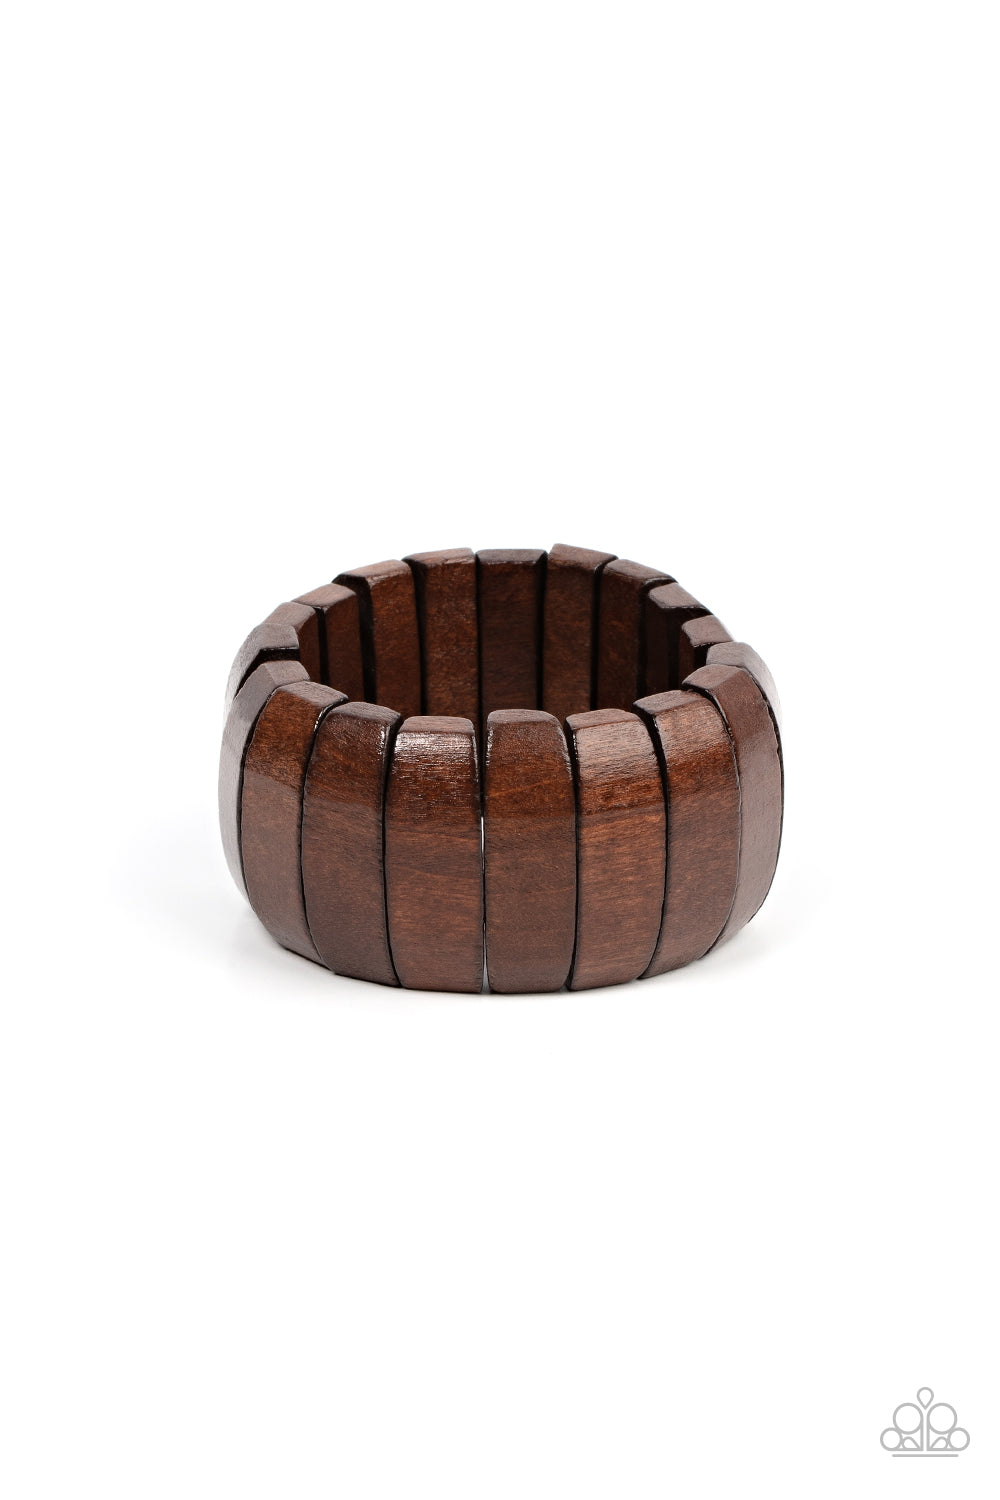 Smooth brown wooden panels are threaded along stretchy bands creating a tropical vibe as they fall around the wrist.